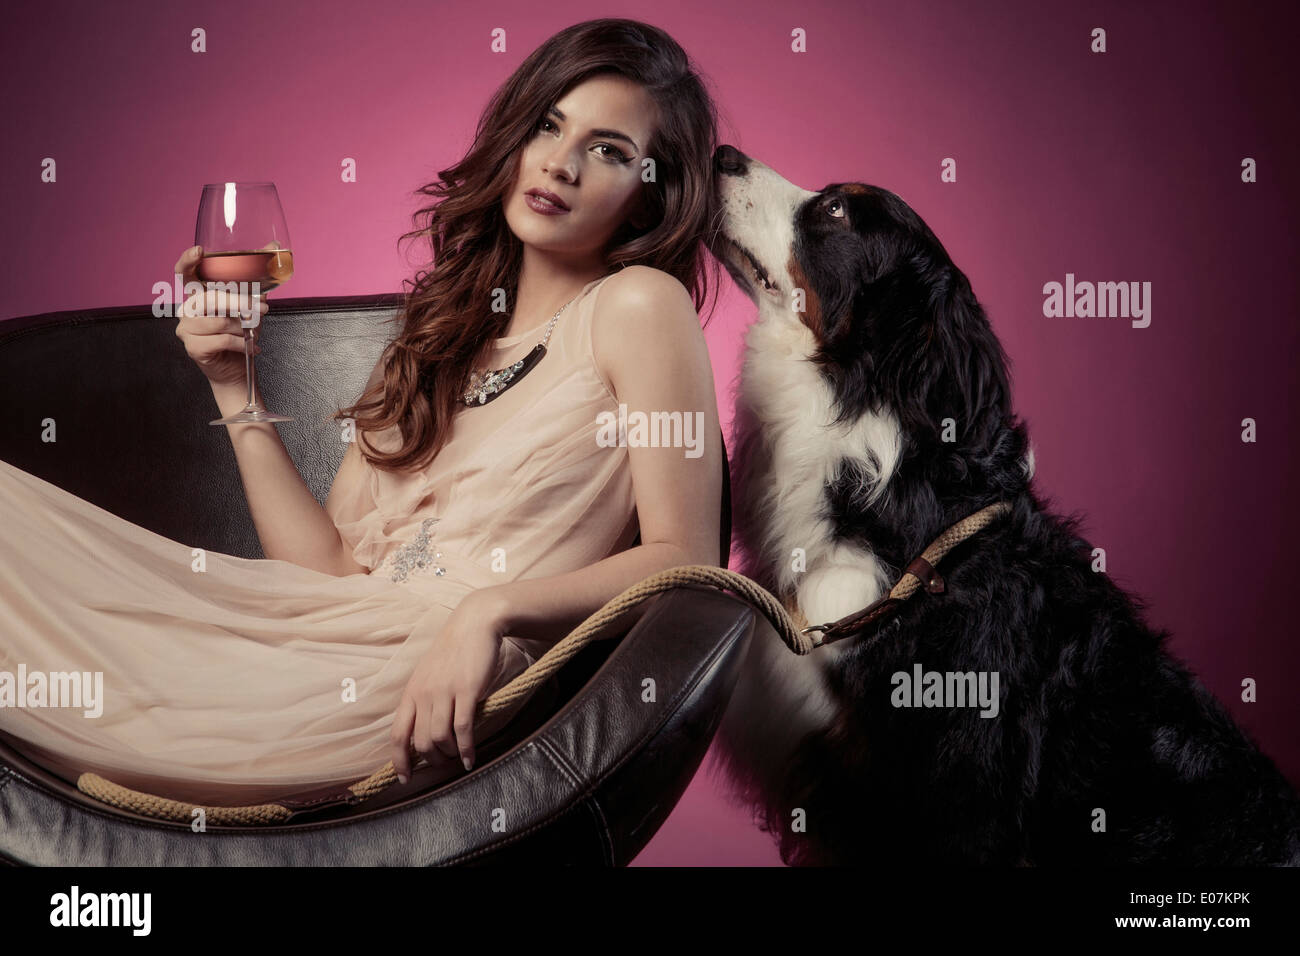 Young woman in evening gown with dog Stock Photo